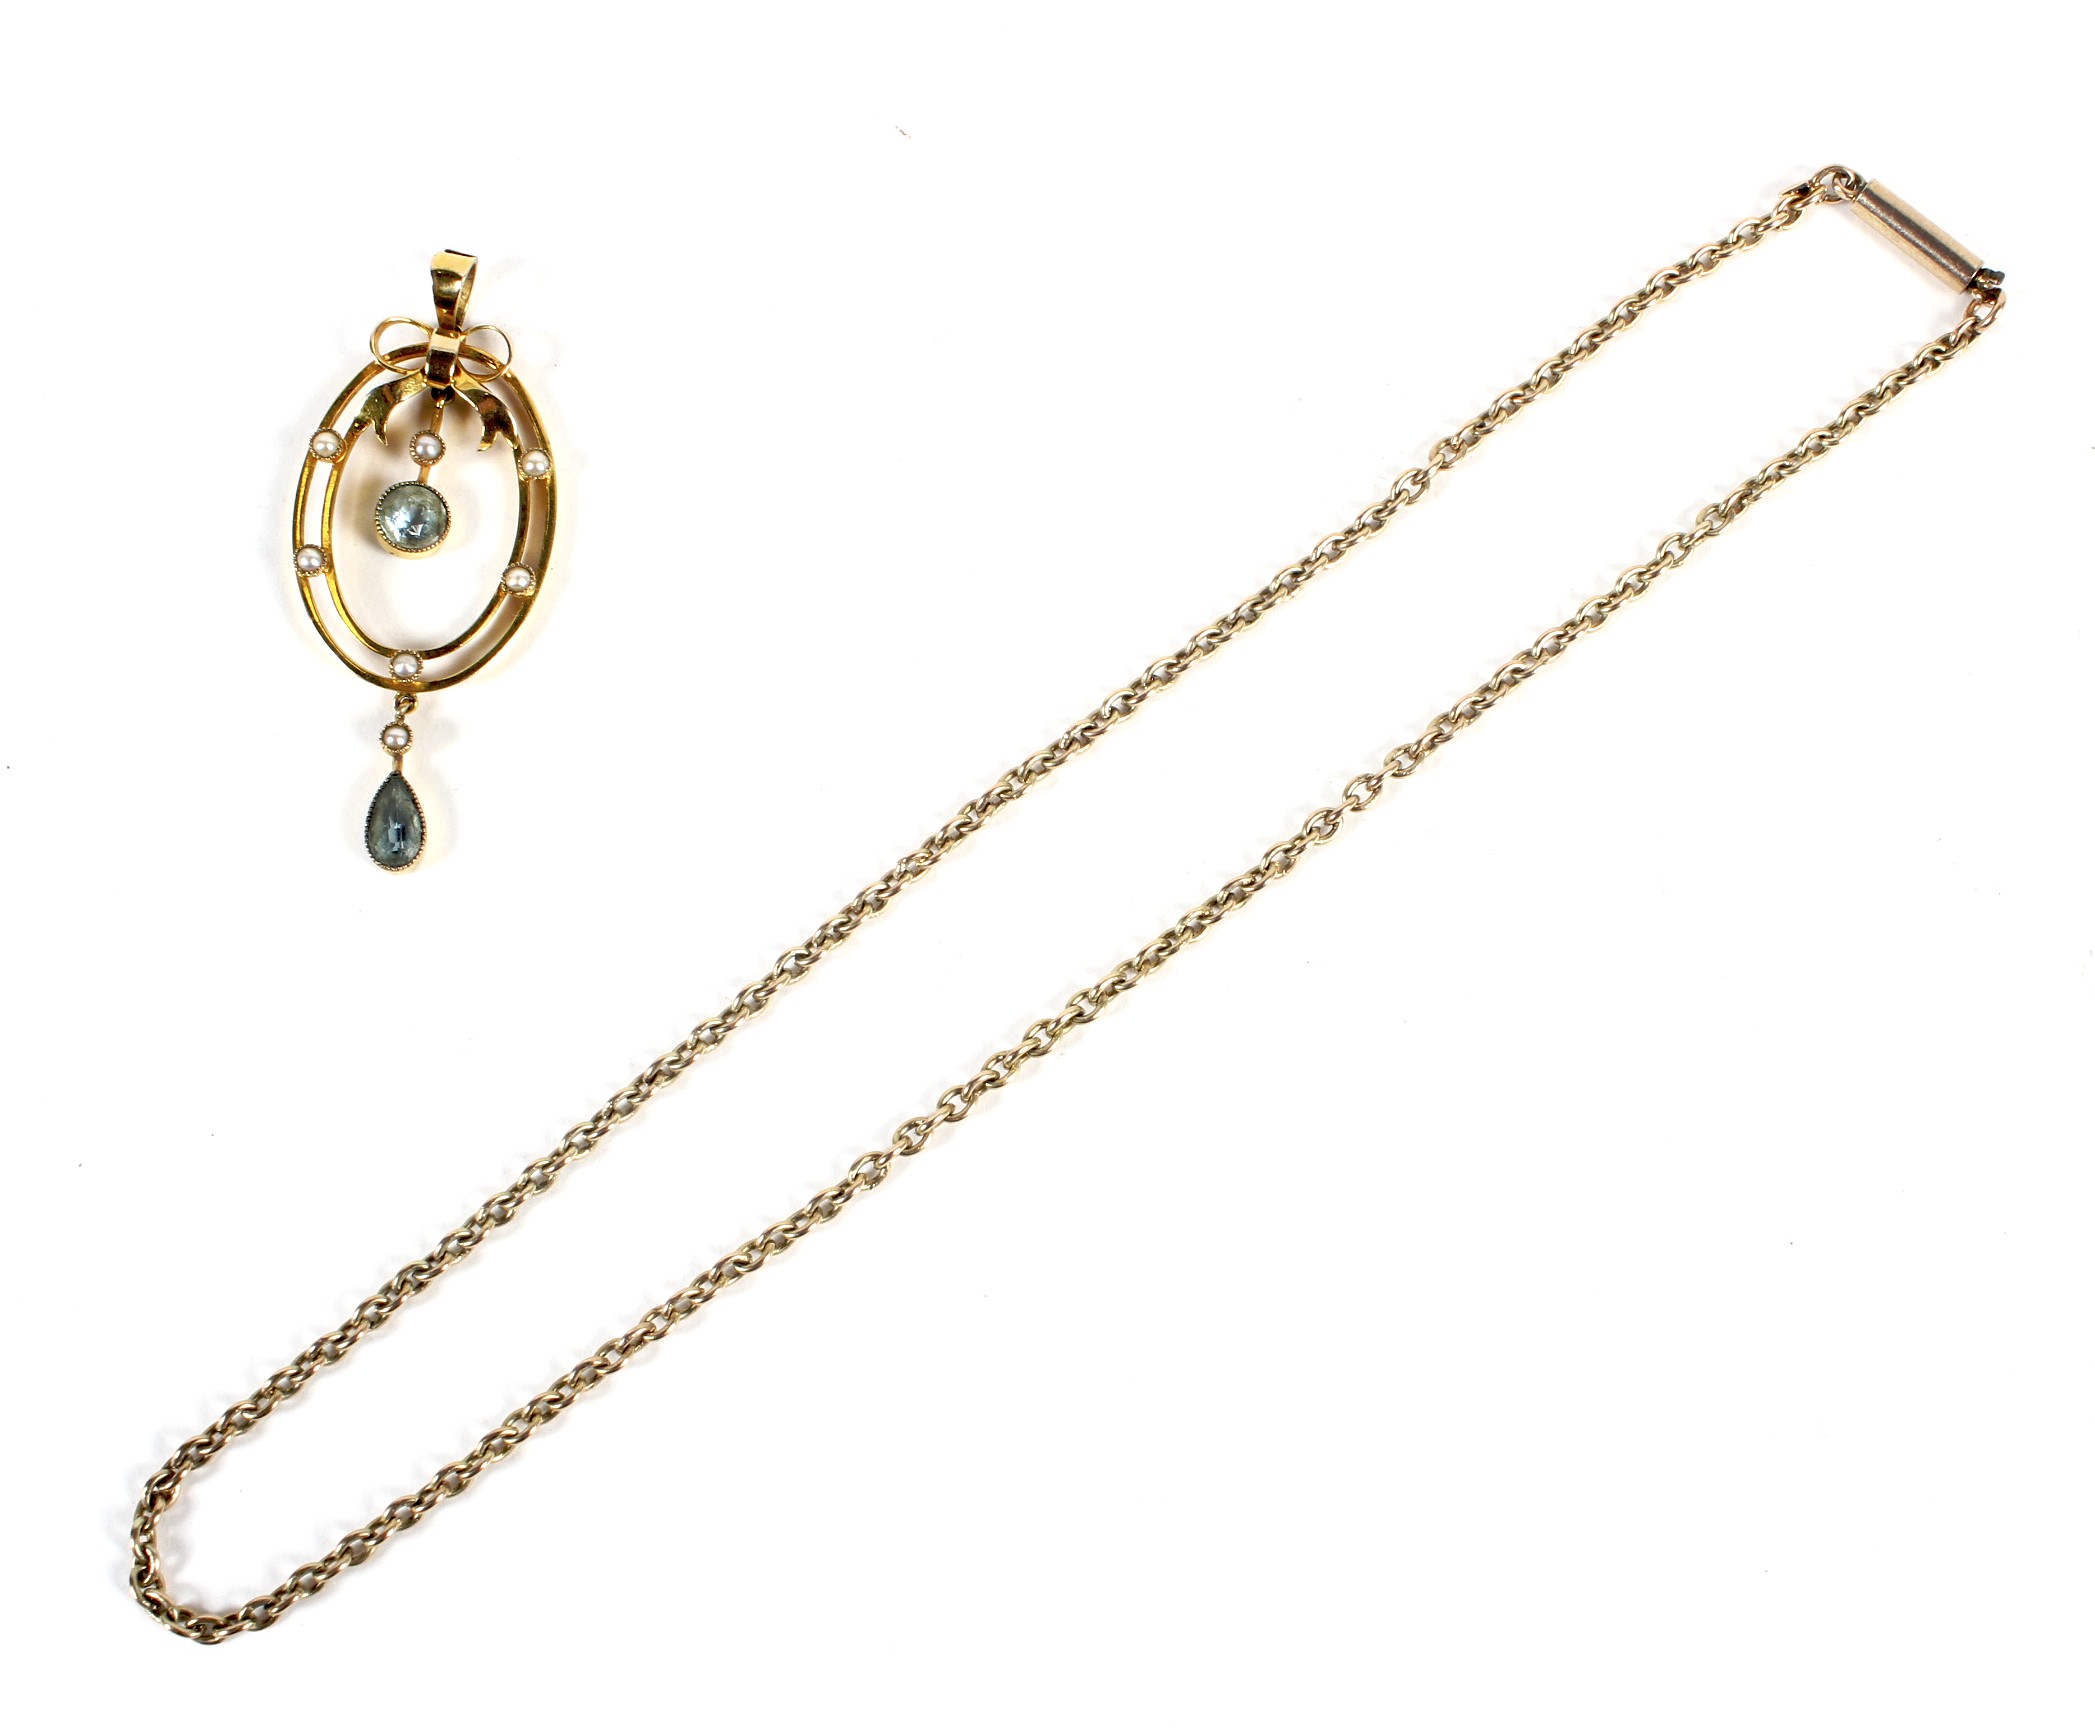 An Edwardian 9ct gold pendant, open oval design with a bow,